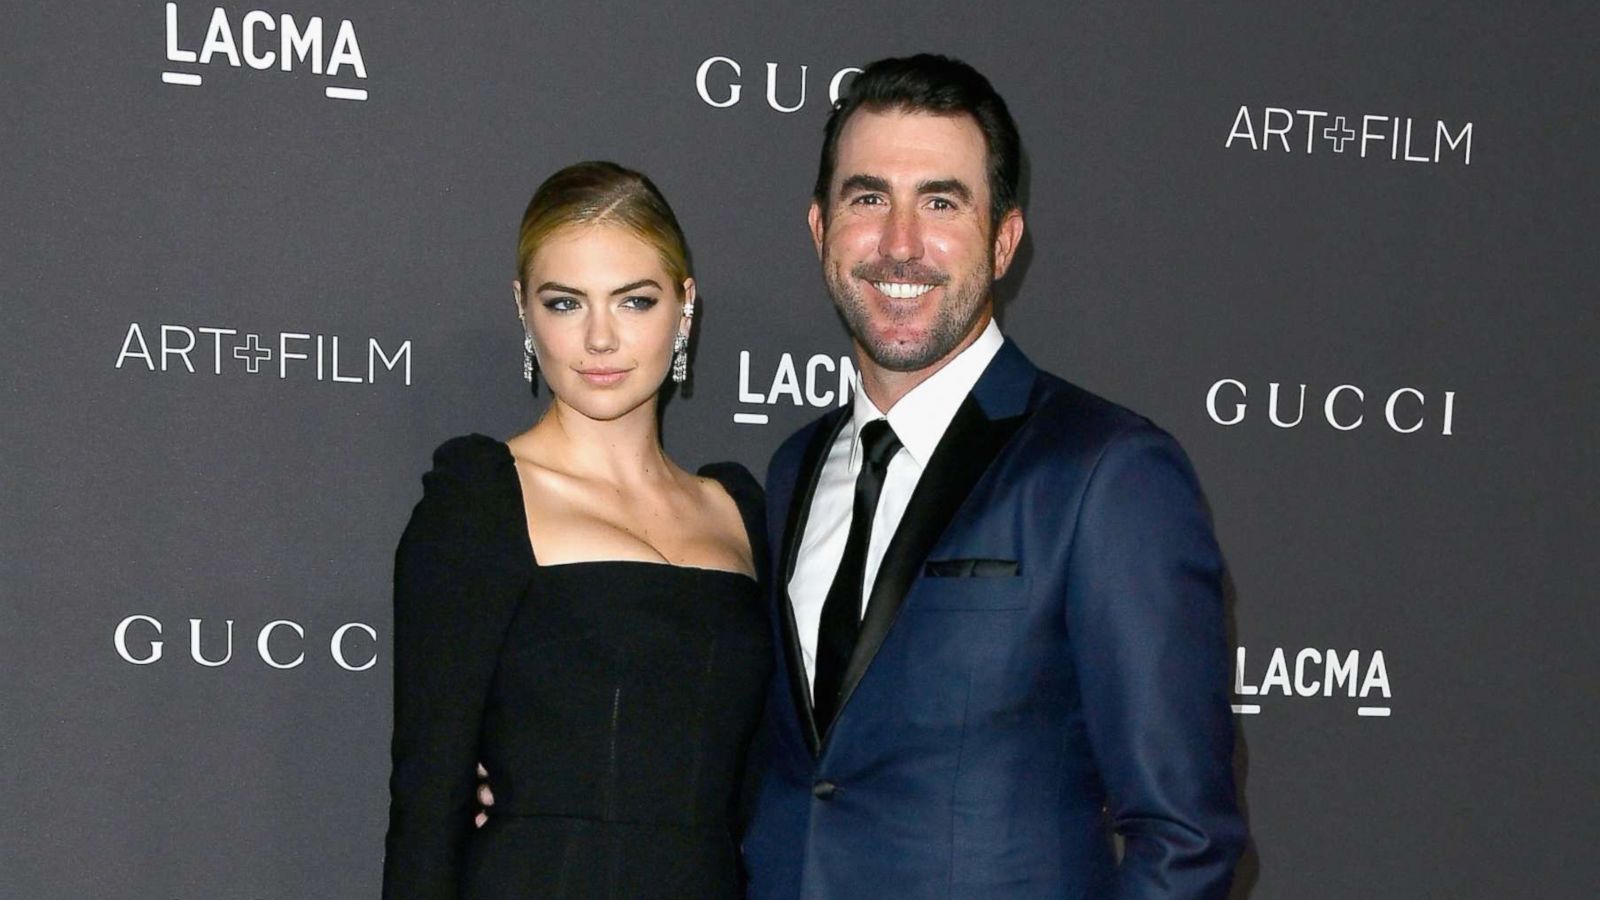 Justin Verlander and Kate Upton officially marry in Italy